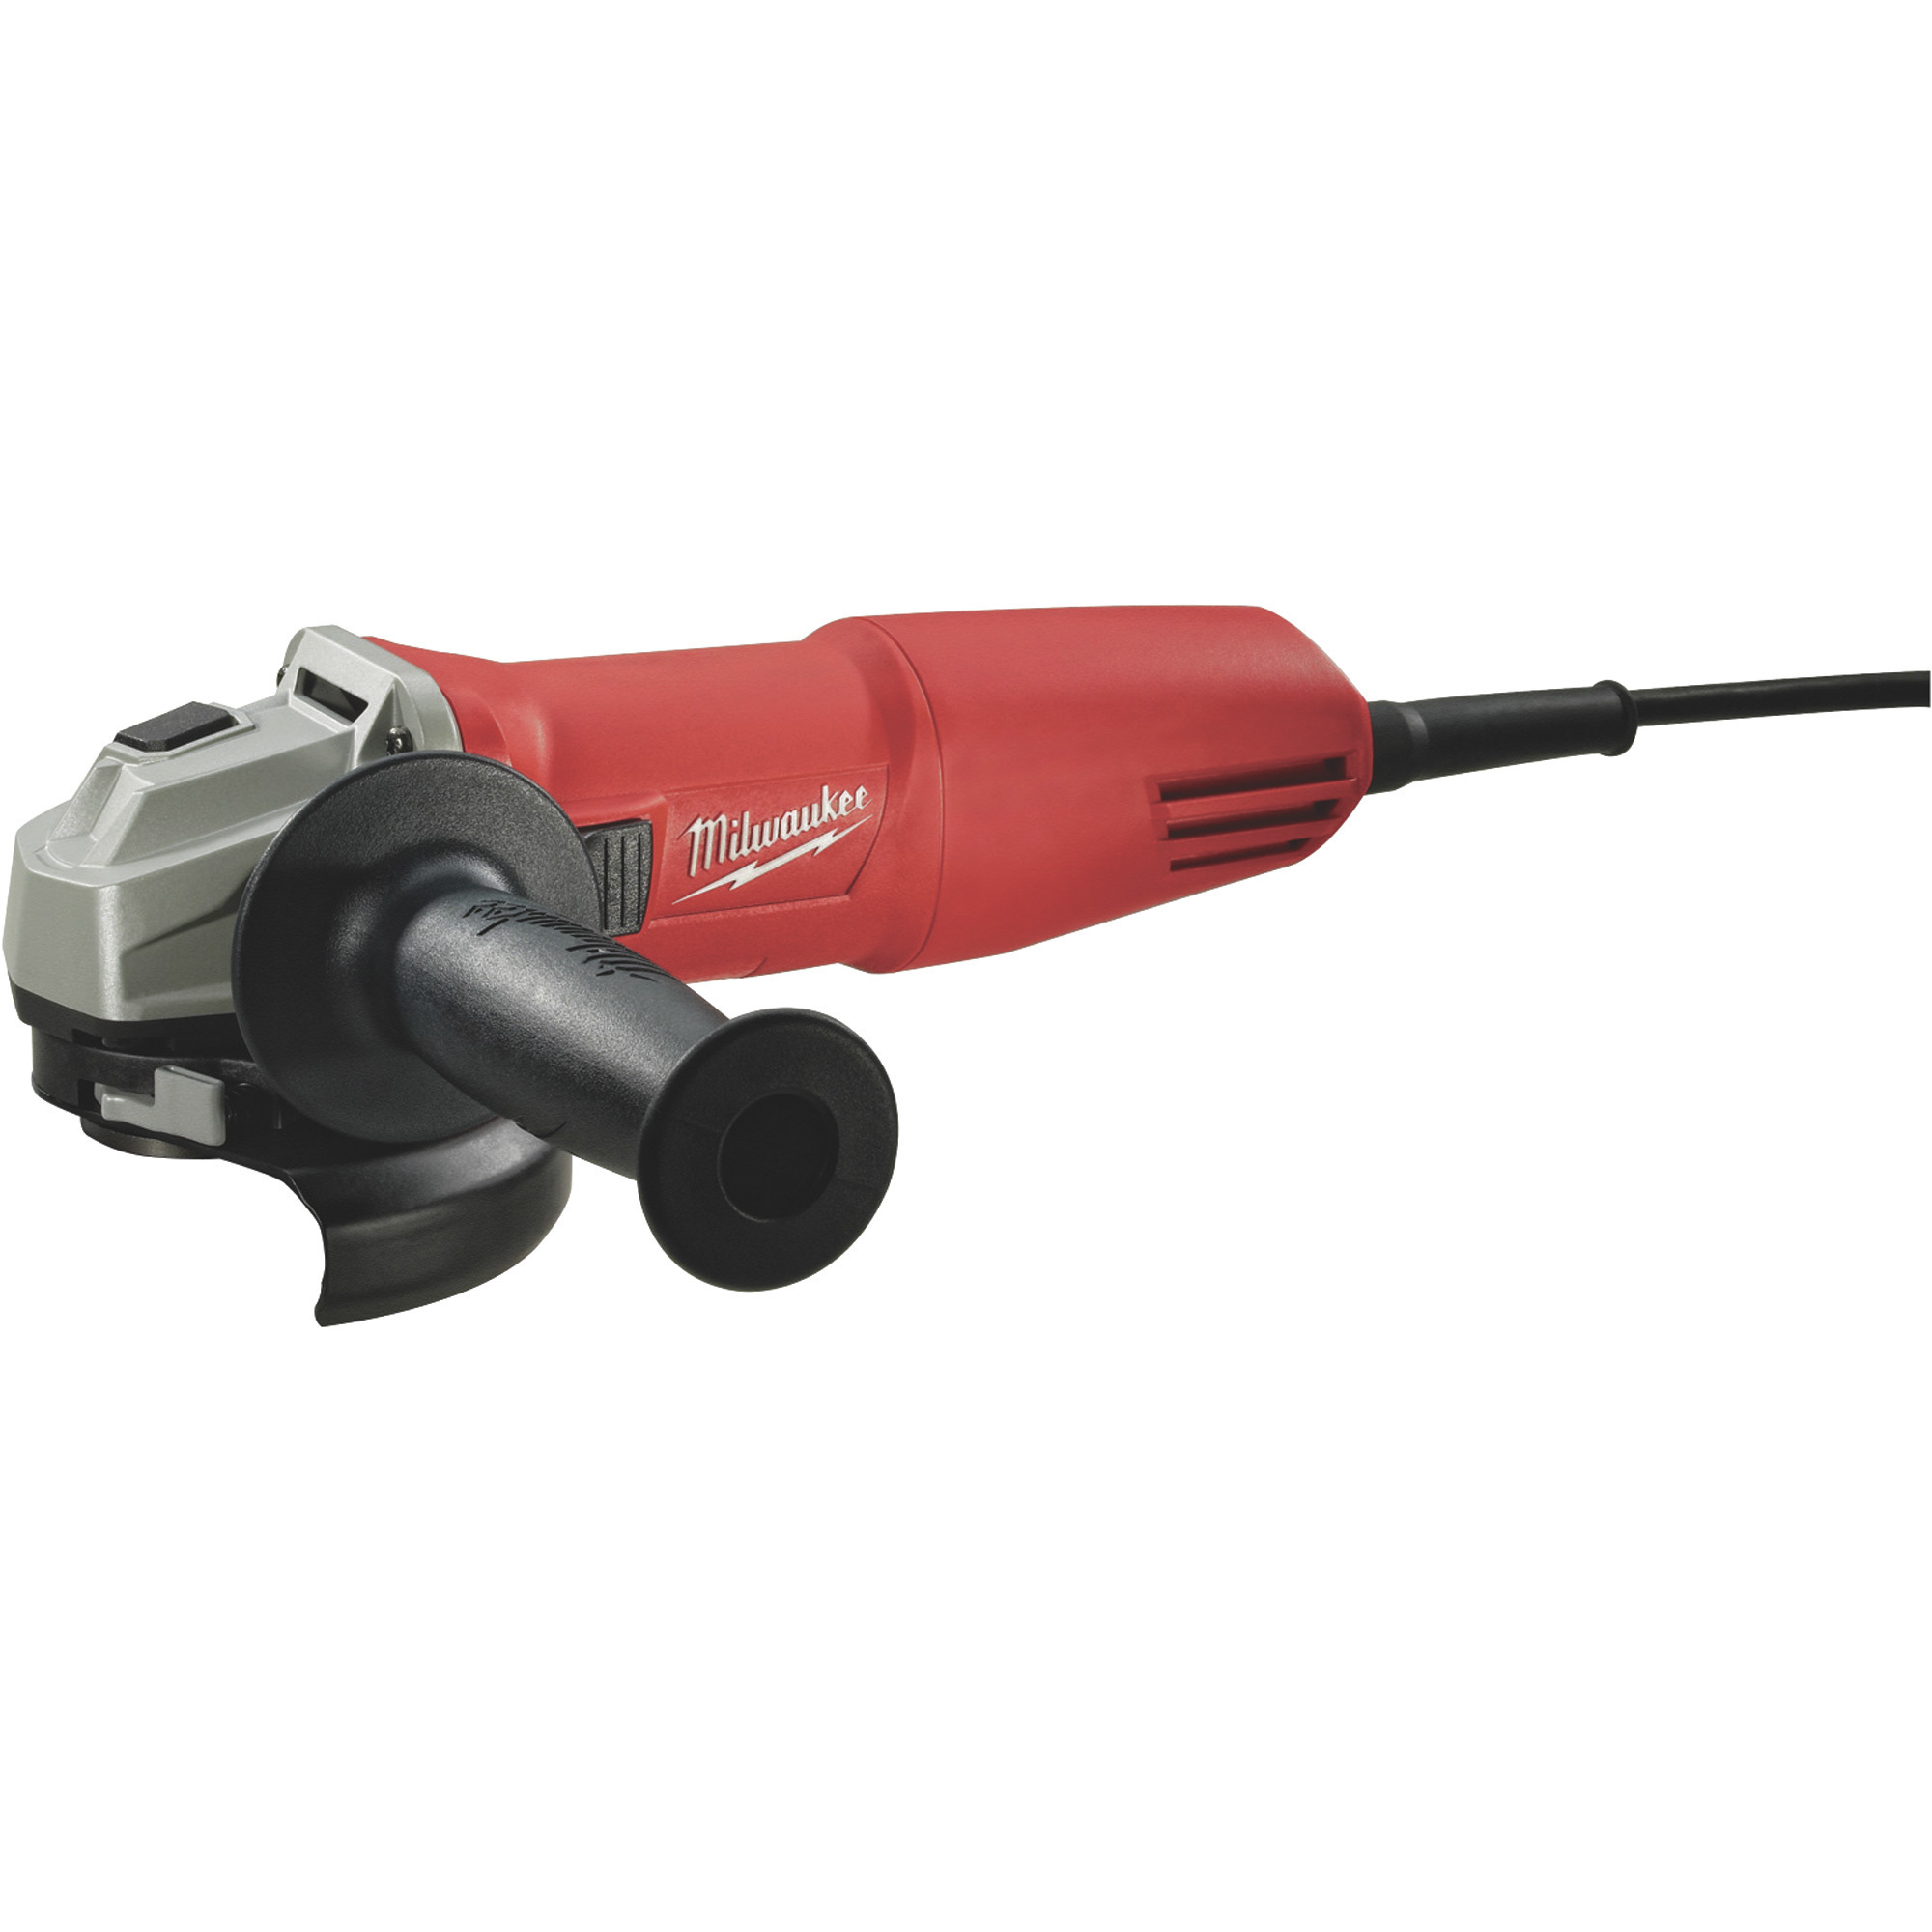 Milwaukee Small Angle Grinder — Amp, 11,000 RPM, Slide Switch, Model#  6130-33 Northern Tool